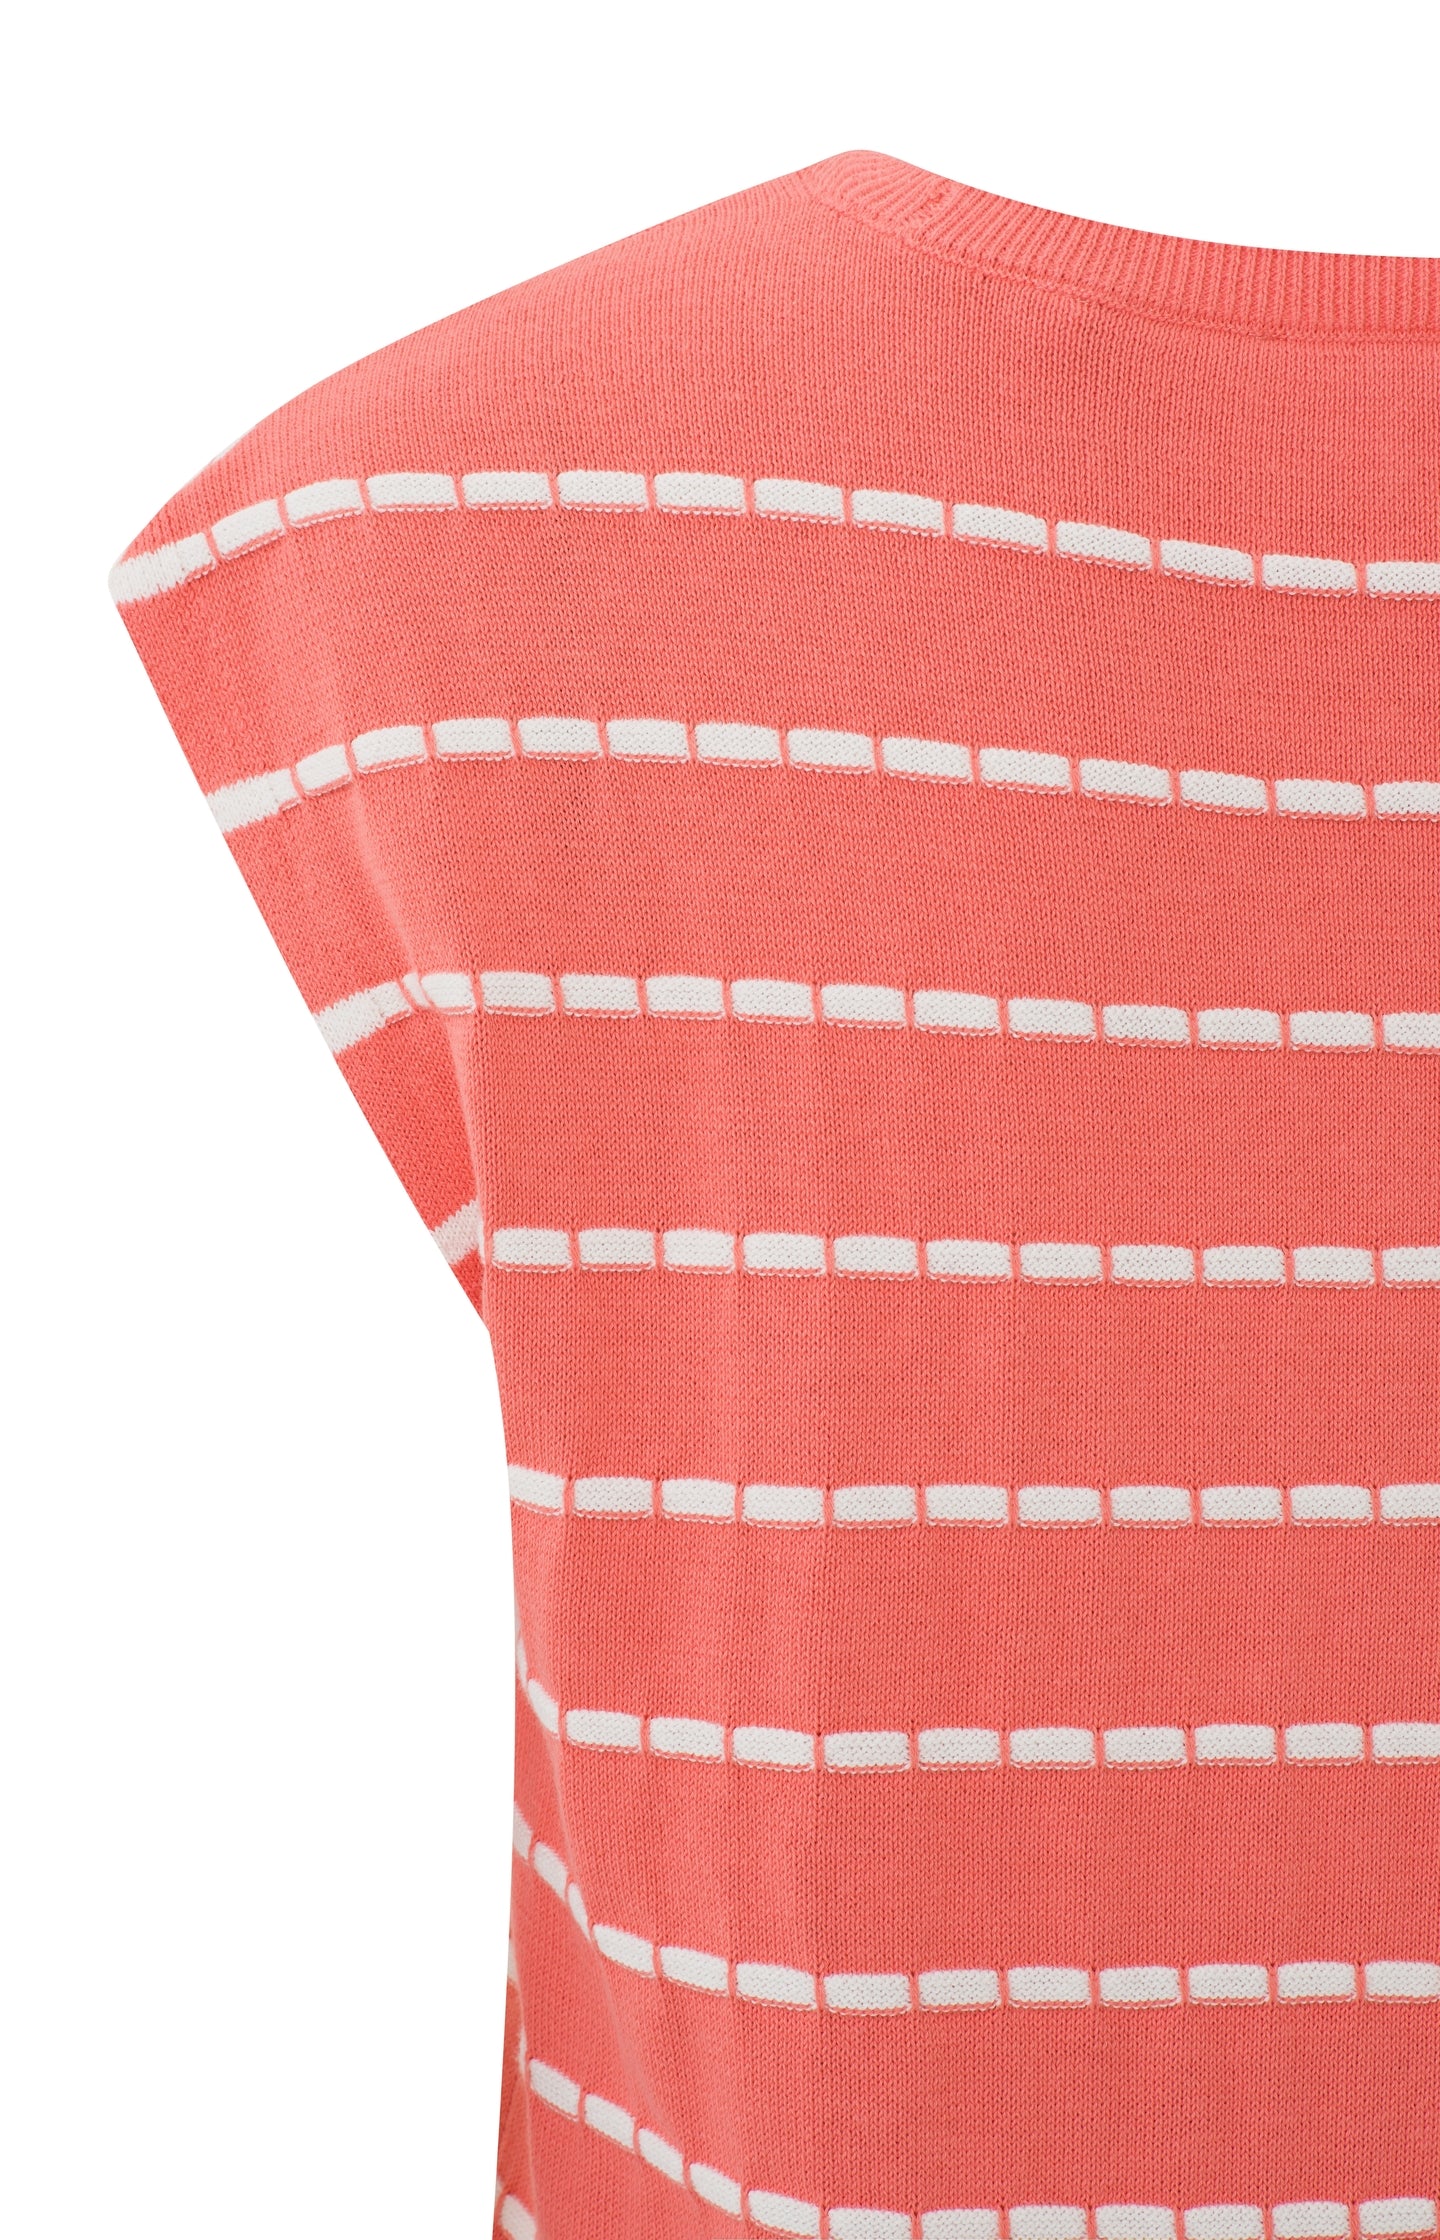 Sleeveless sweater with round neck and stripe pattern